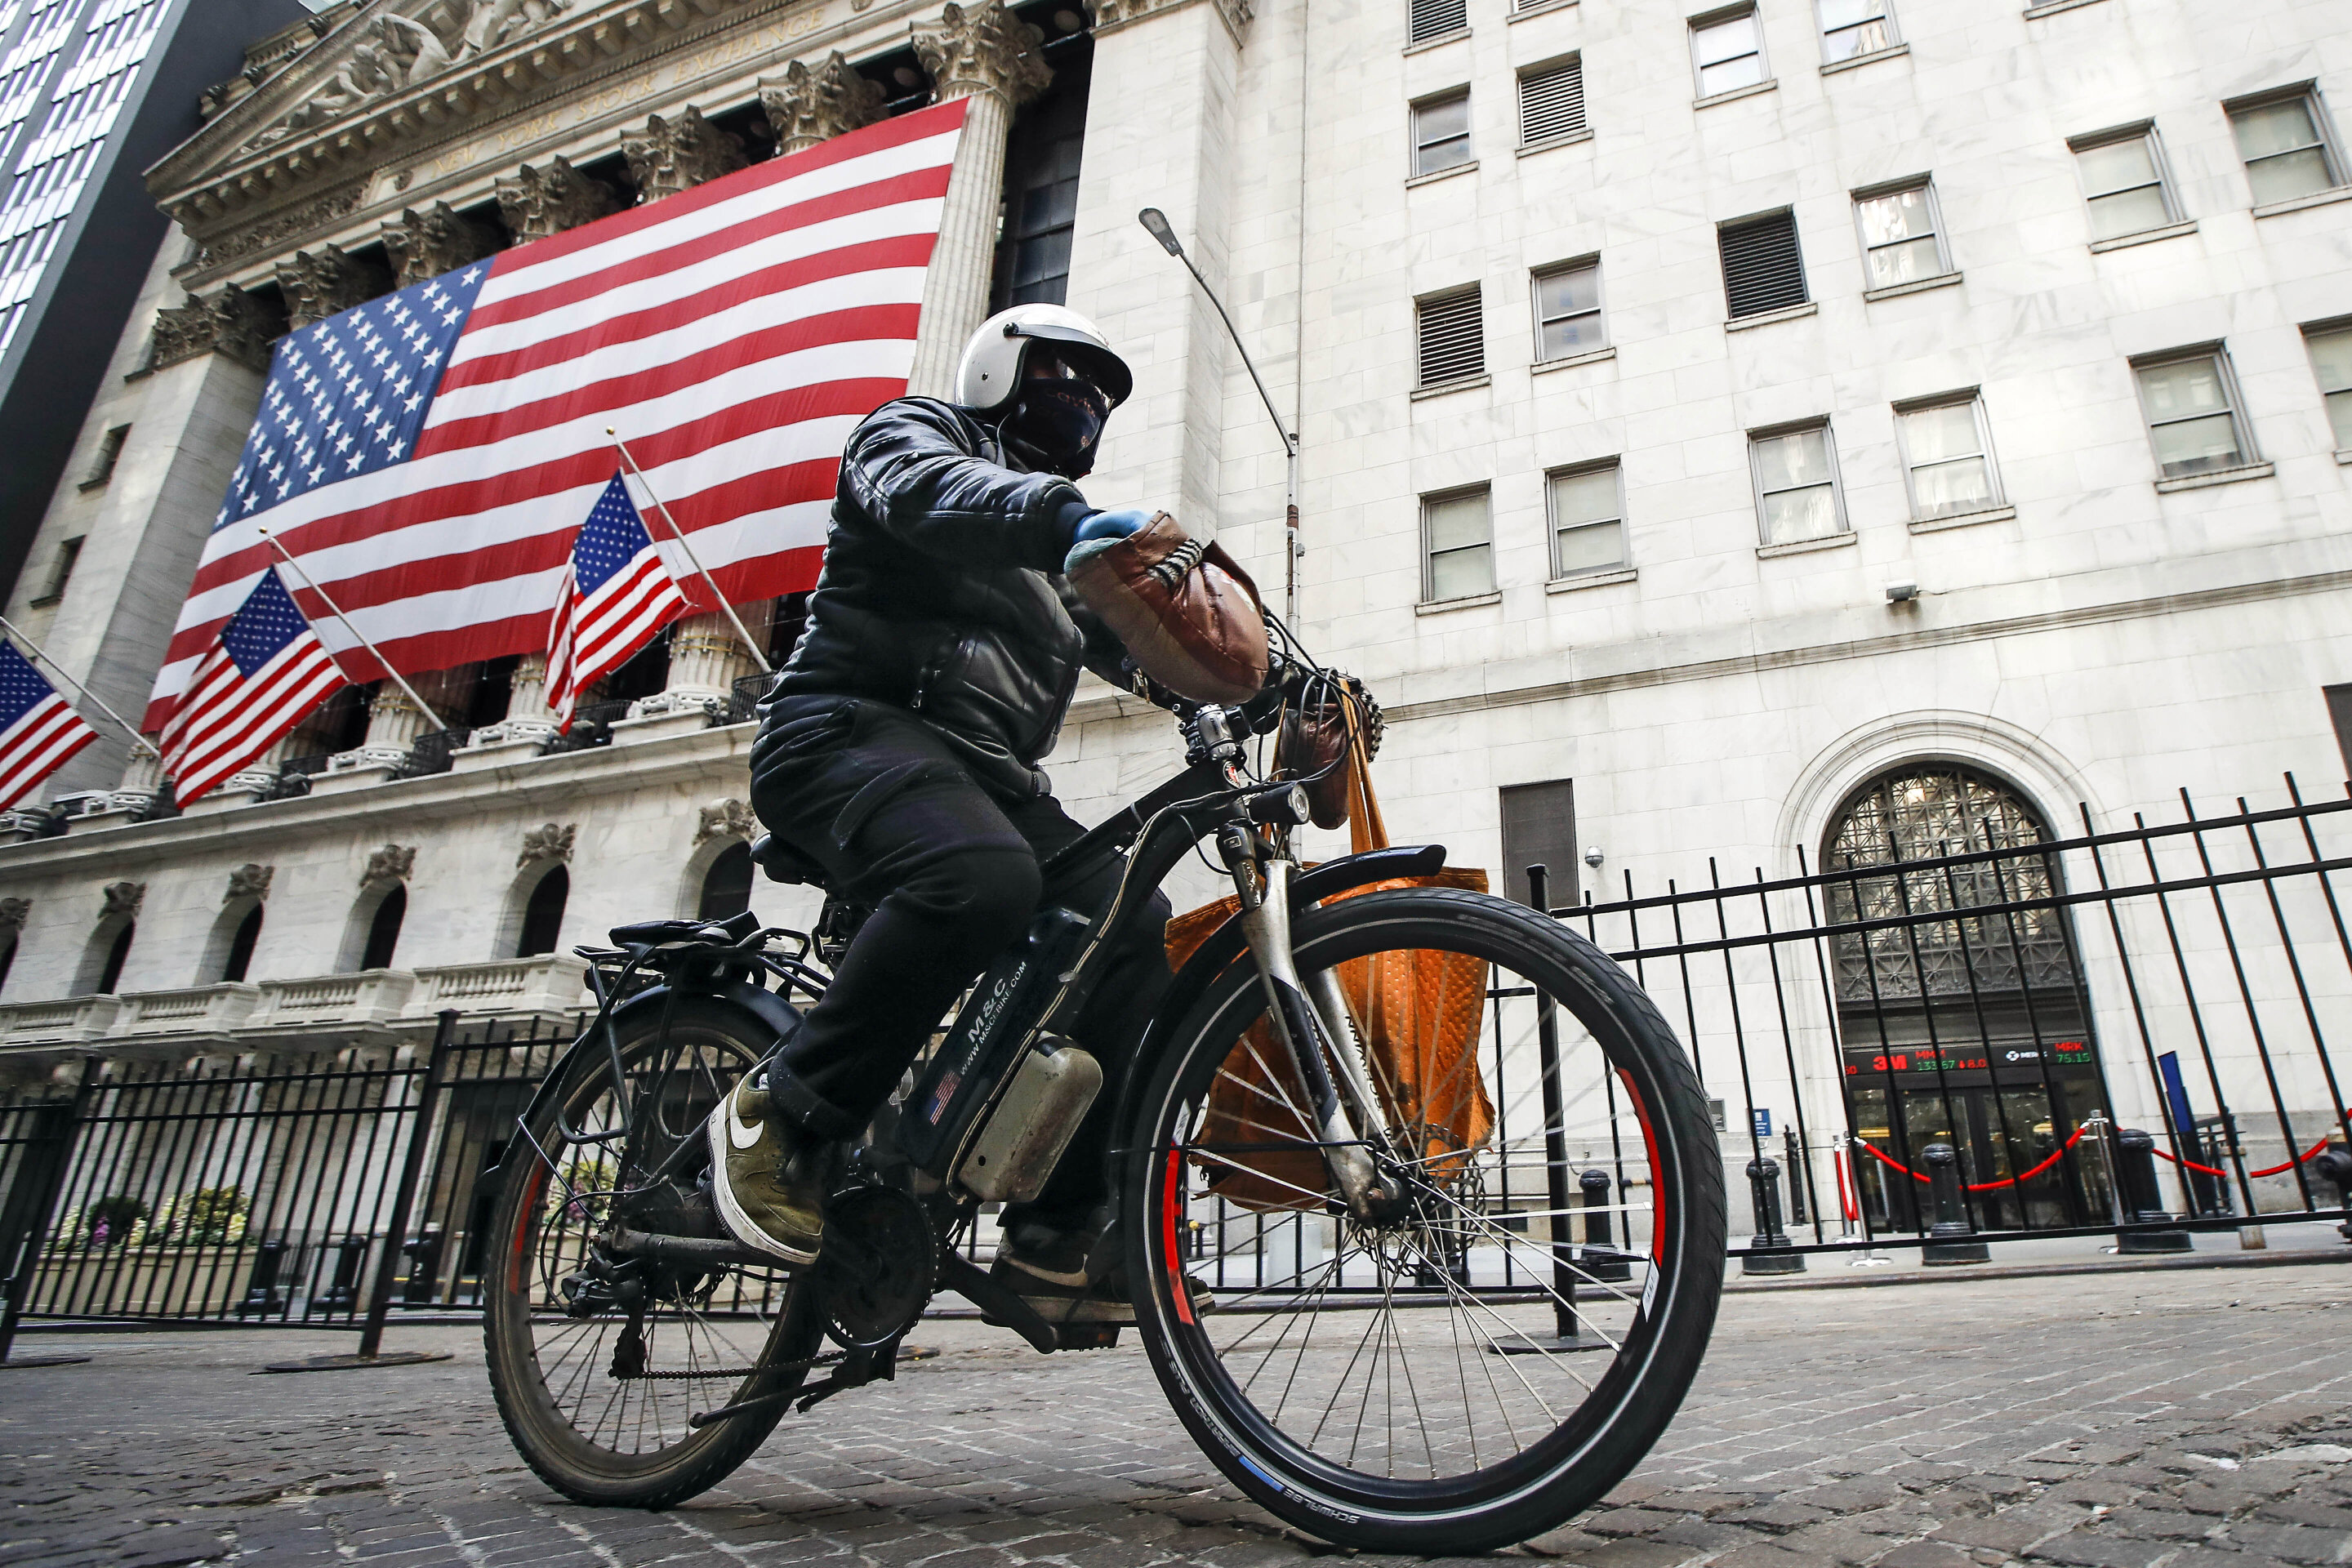 E-bike batteries blamed for 22 NYC fires, 2 deaths this year